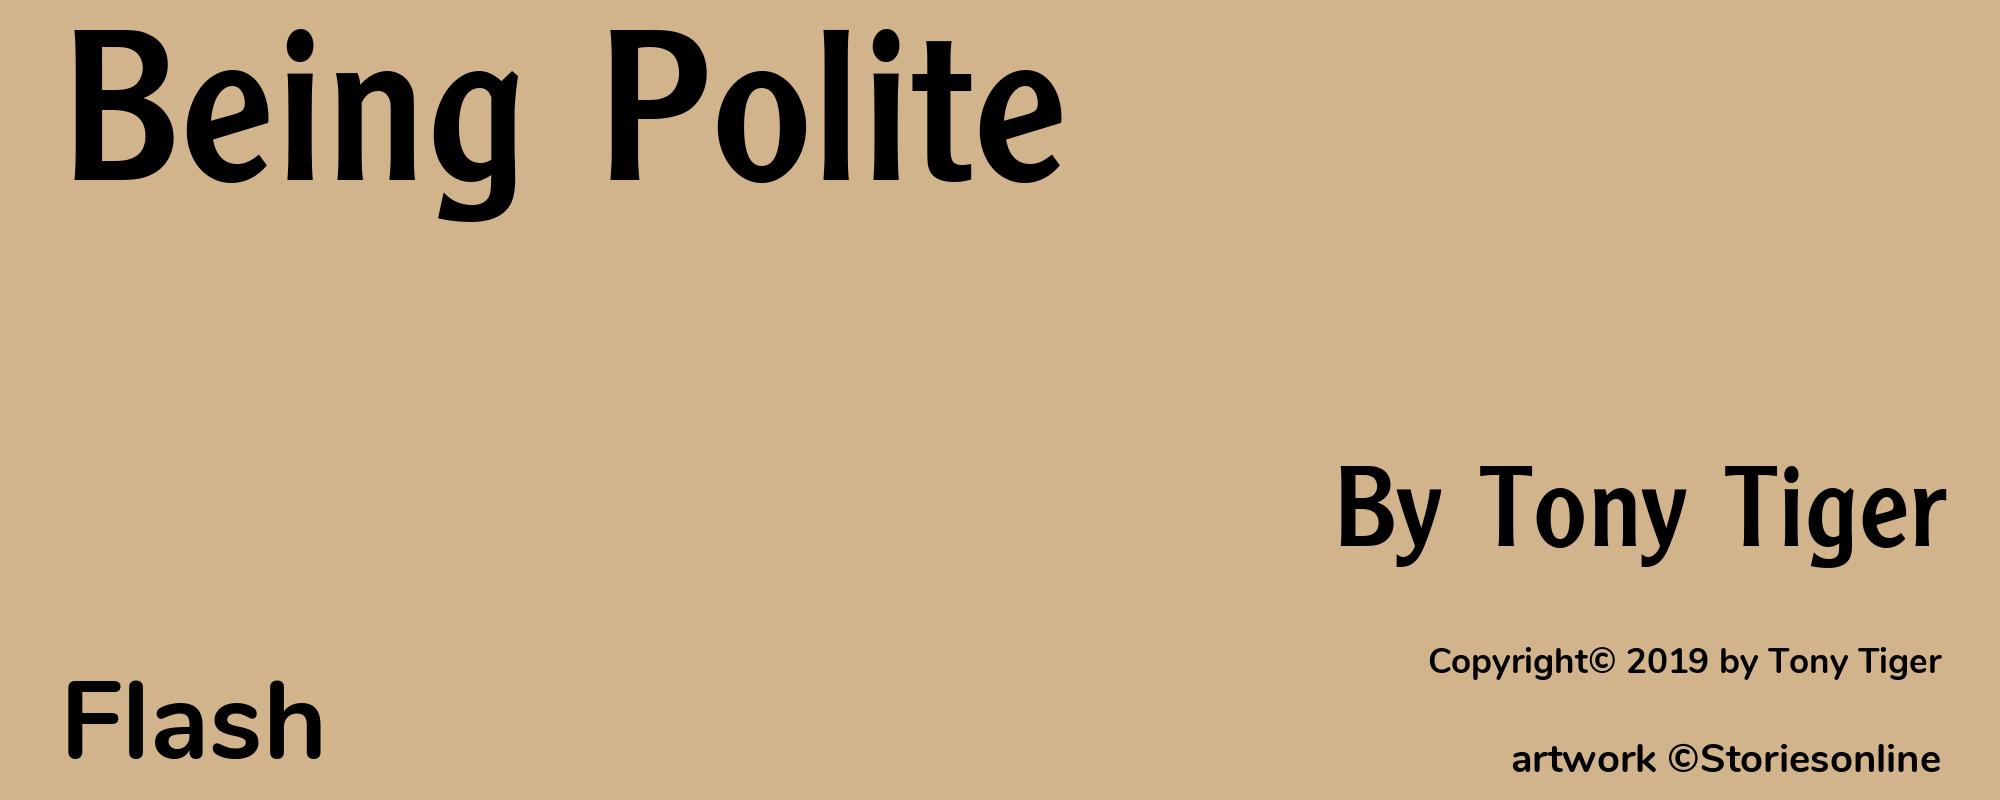 Being Polite - Cover